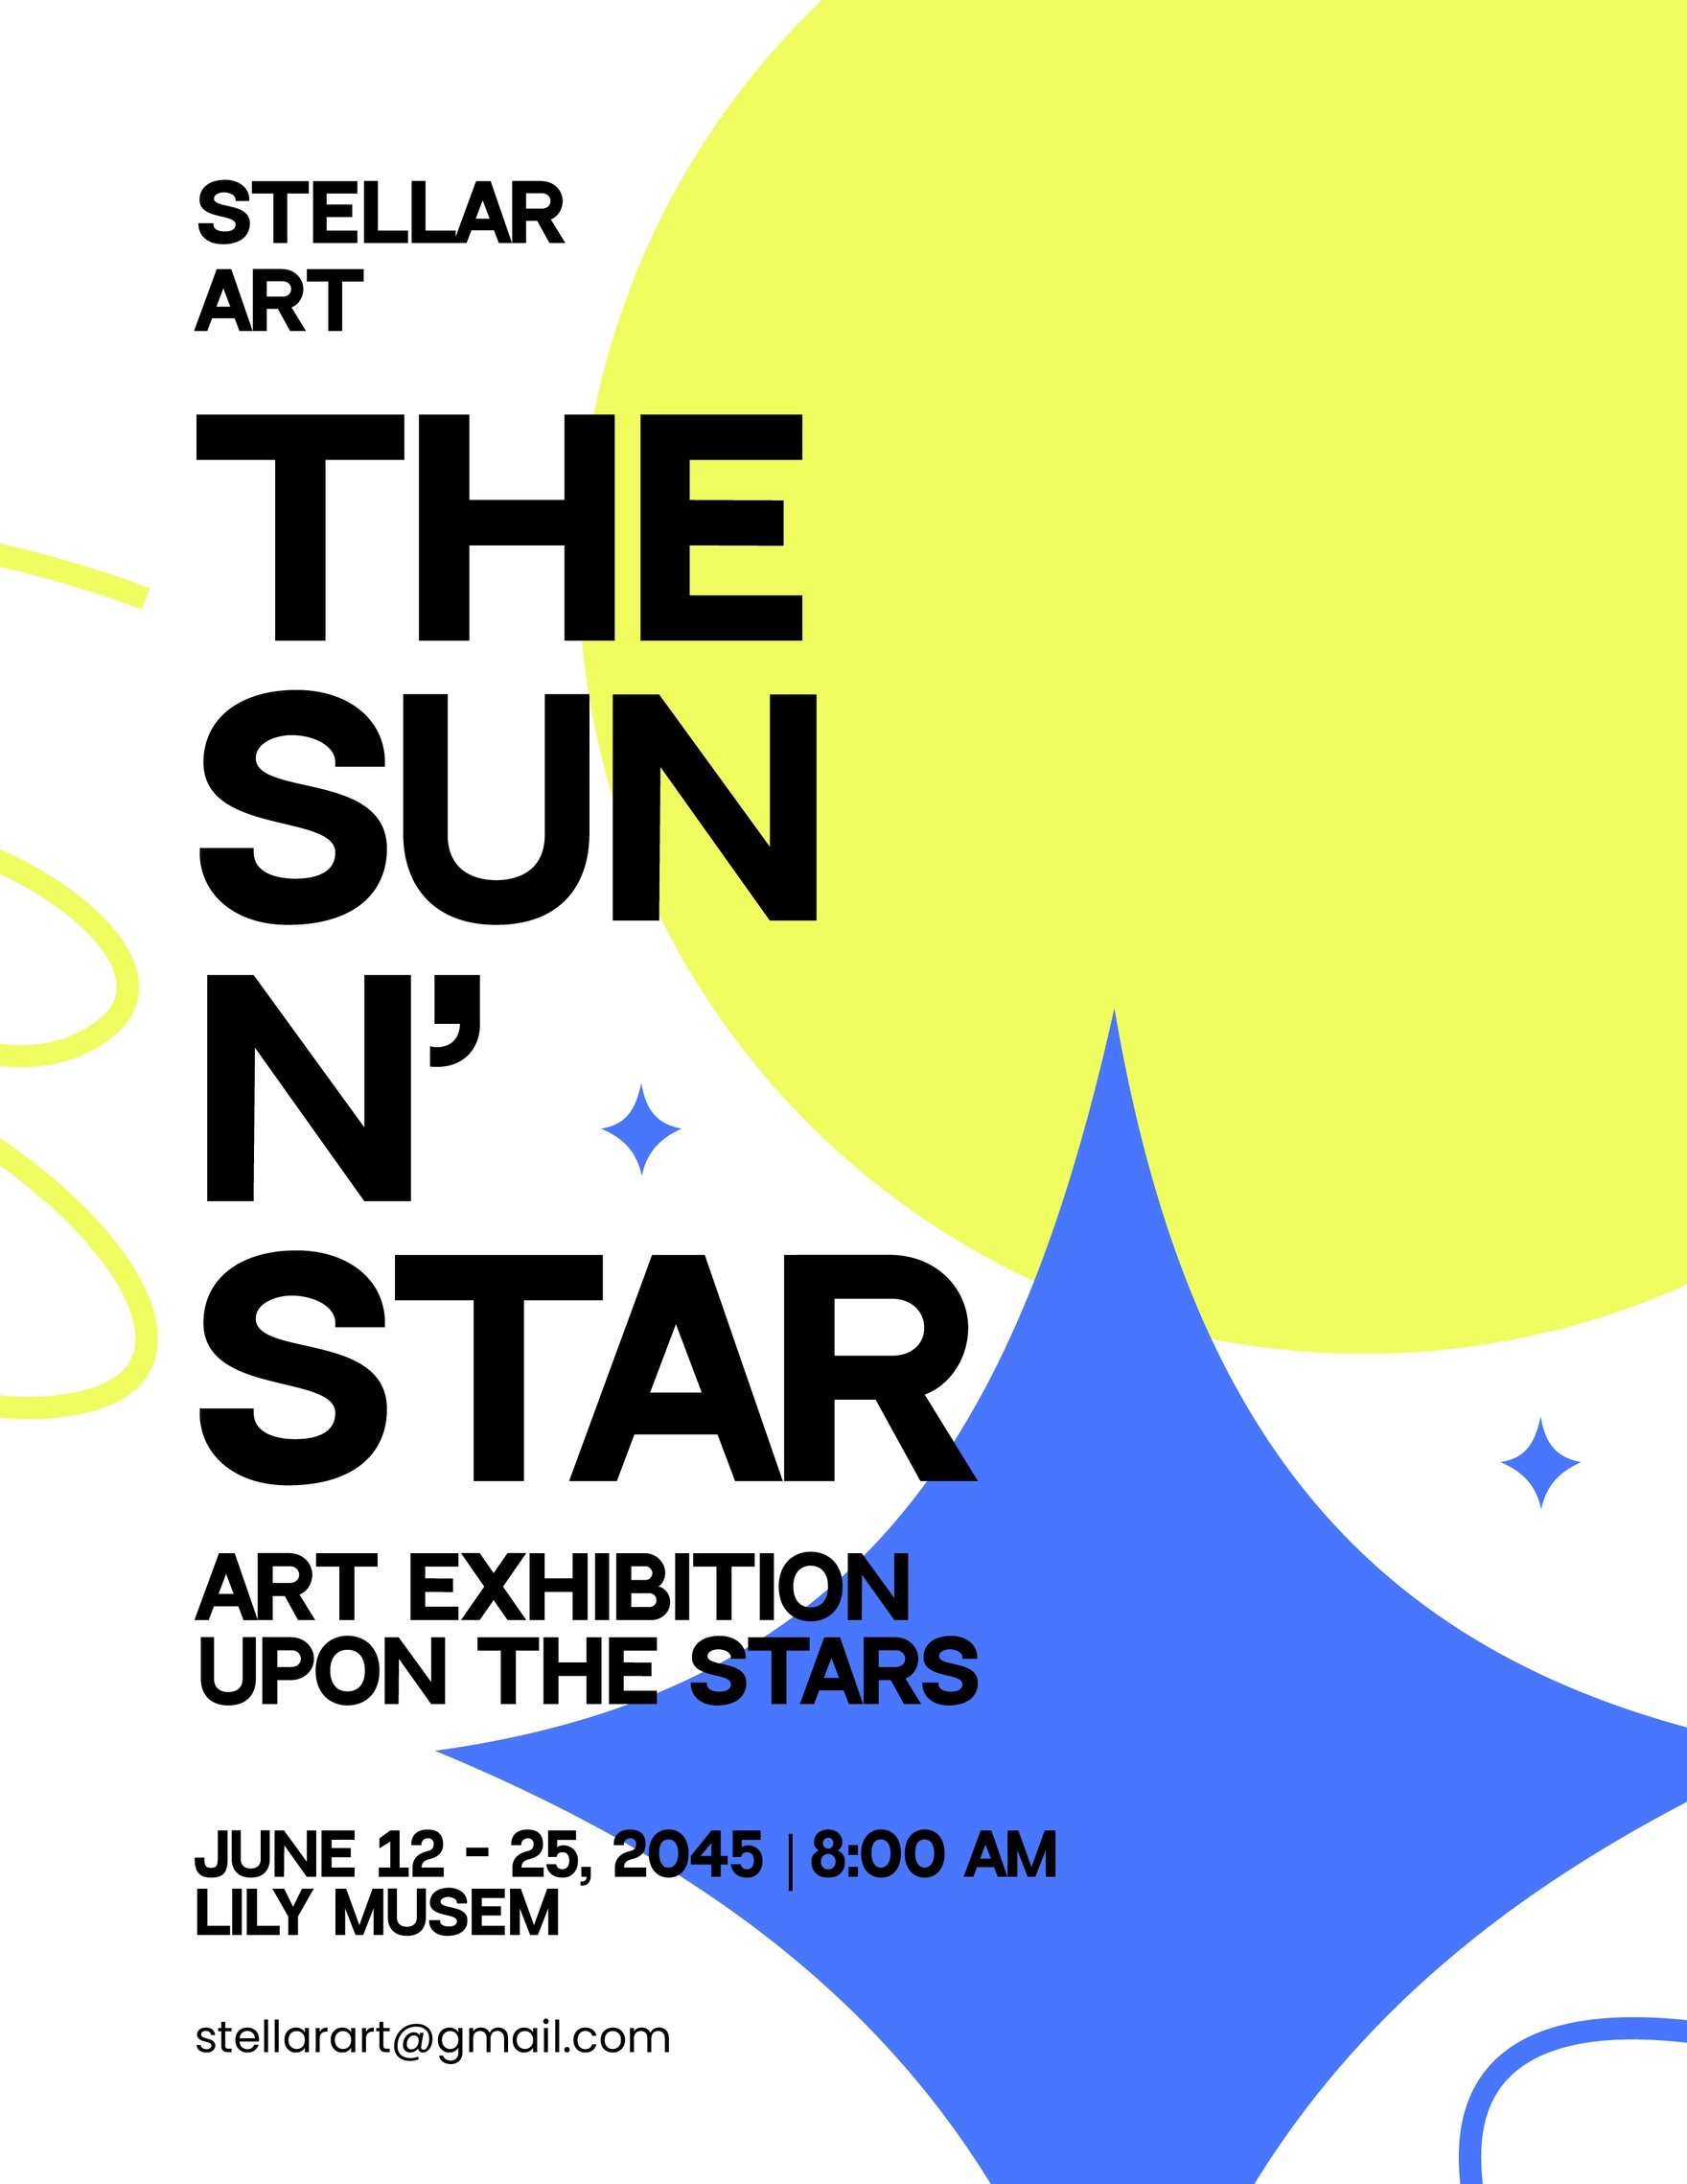 Creative Art Exhibition Flyer in Word, Google Docs, Illustrator, PSD, Apple Pages, Publisher